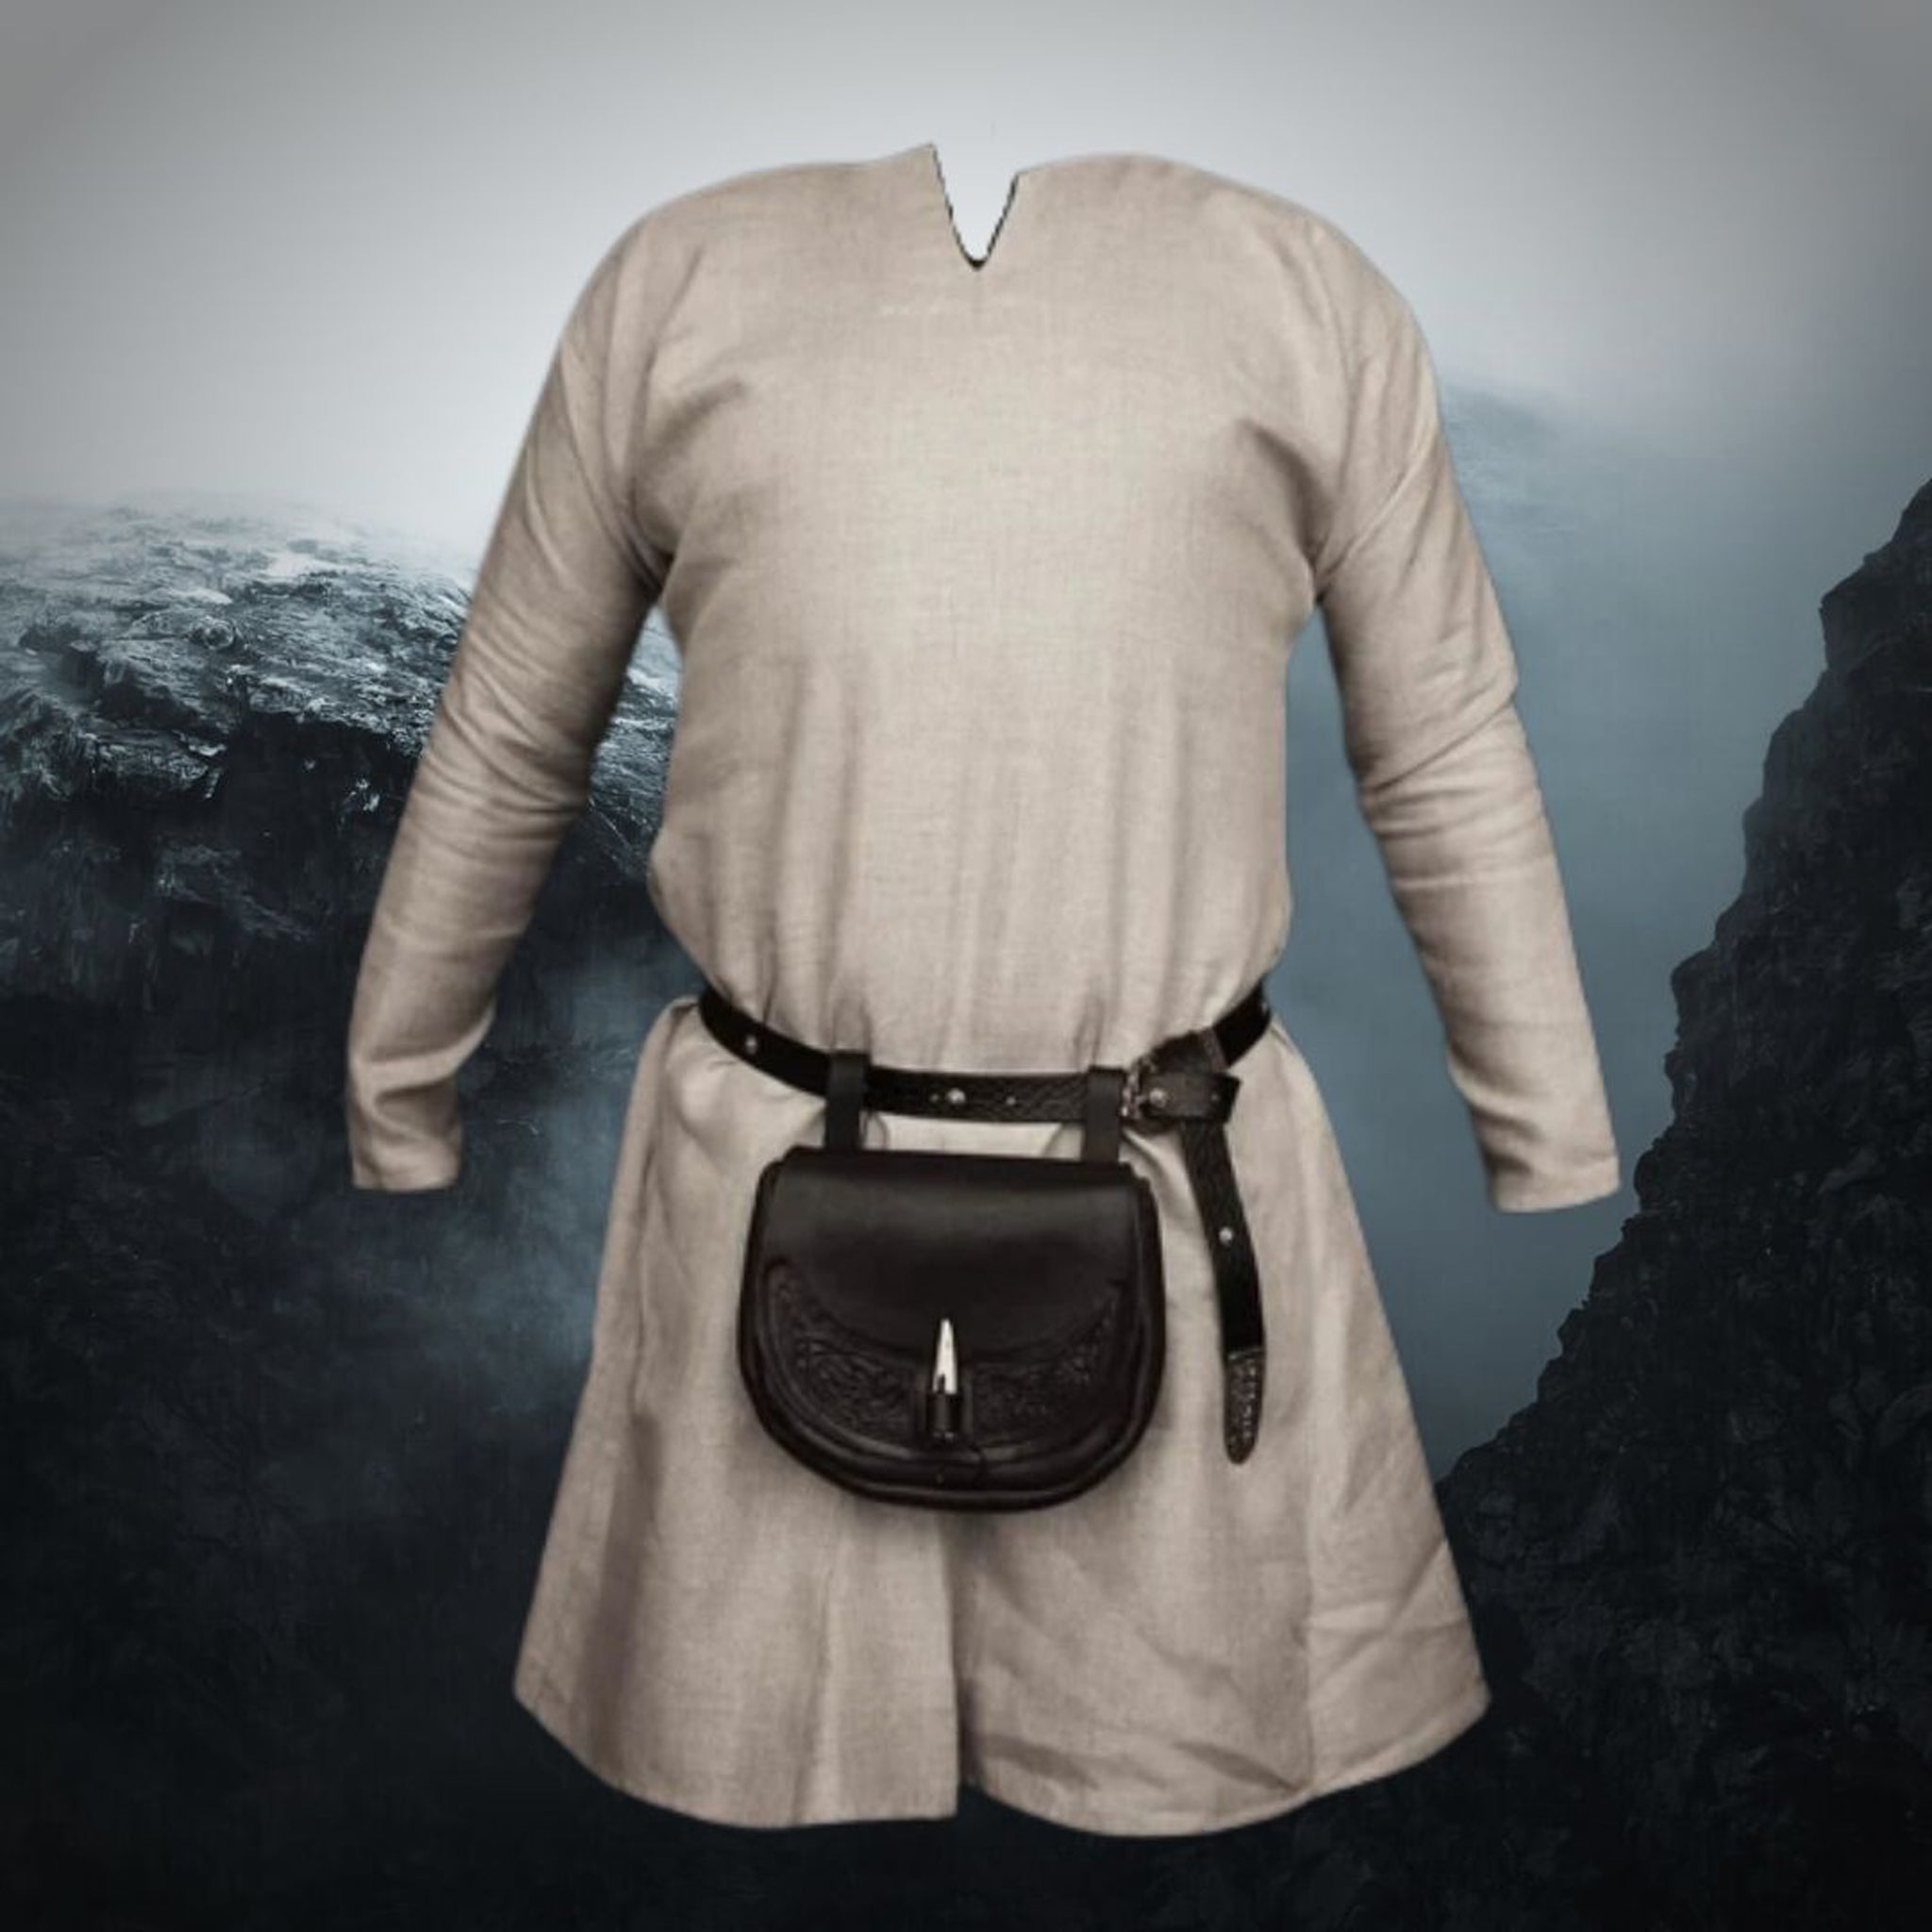 Handmade Natural Linen Viking Tunic on Icy Crags Background